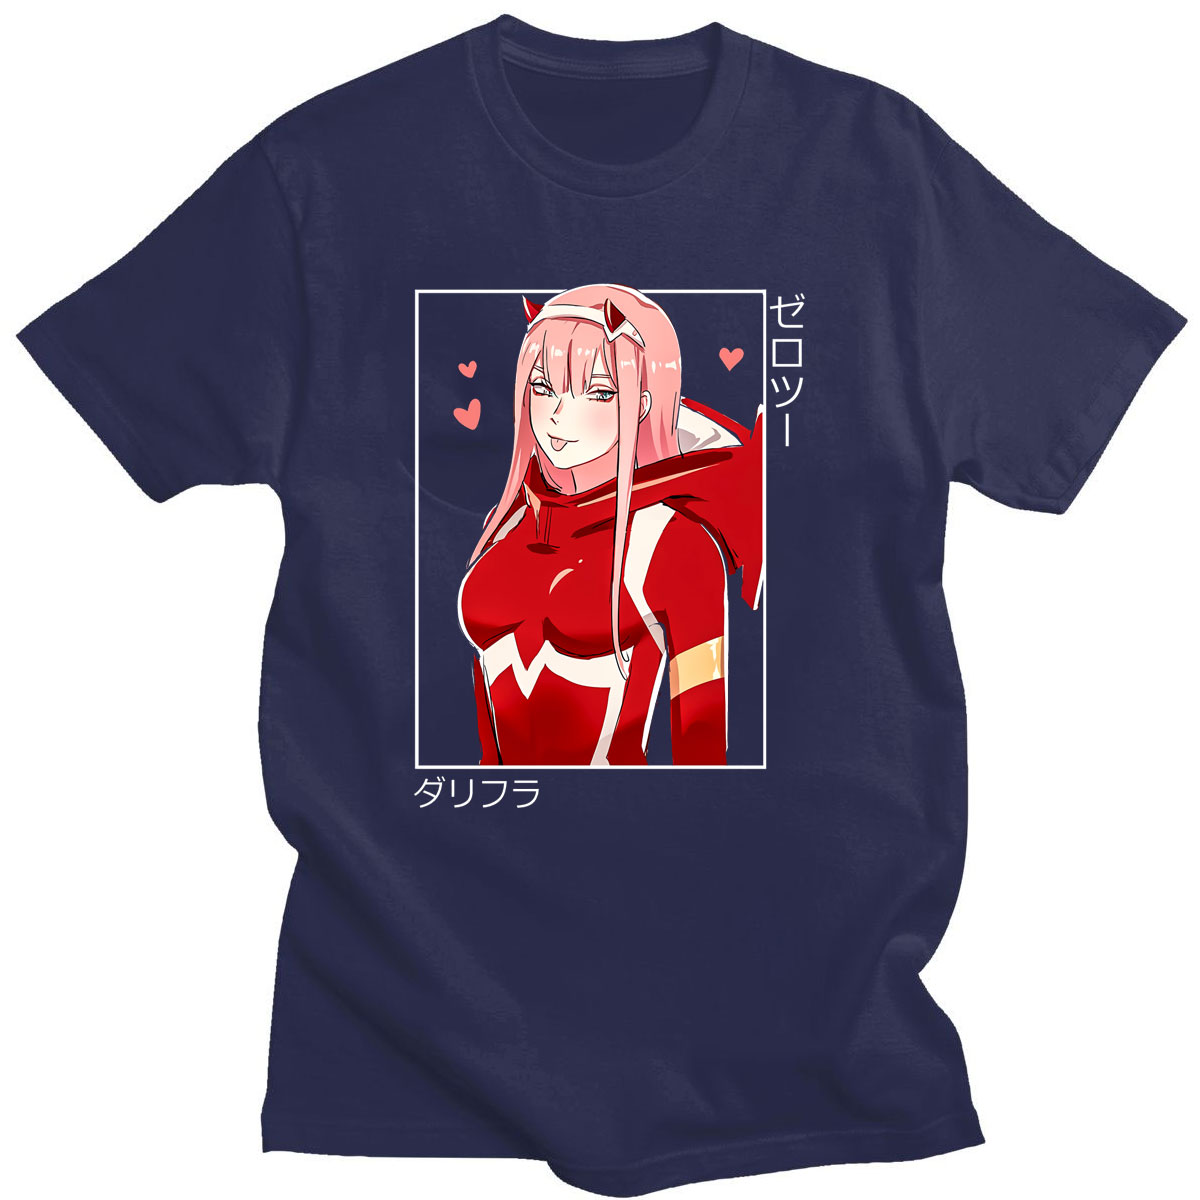 Darling In The Franxx T-shirt - Anime Graphic Print T-shirts